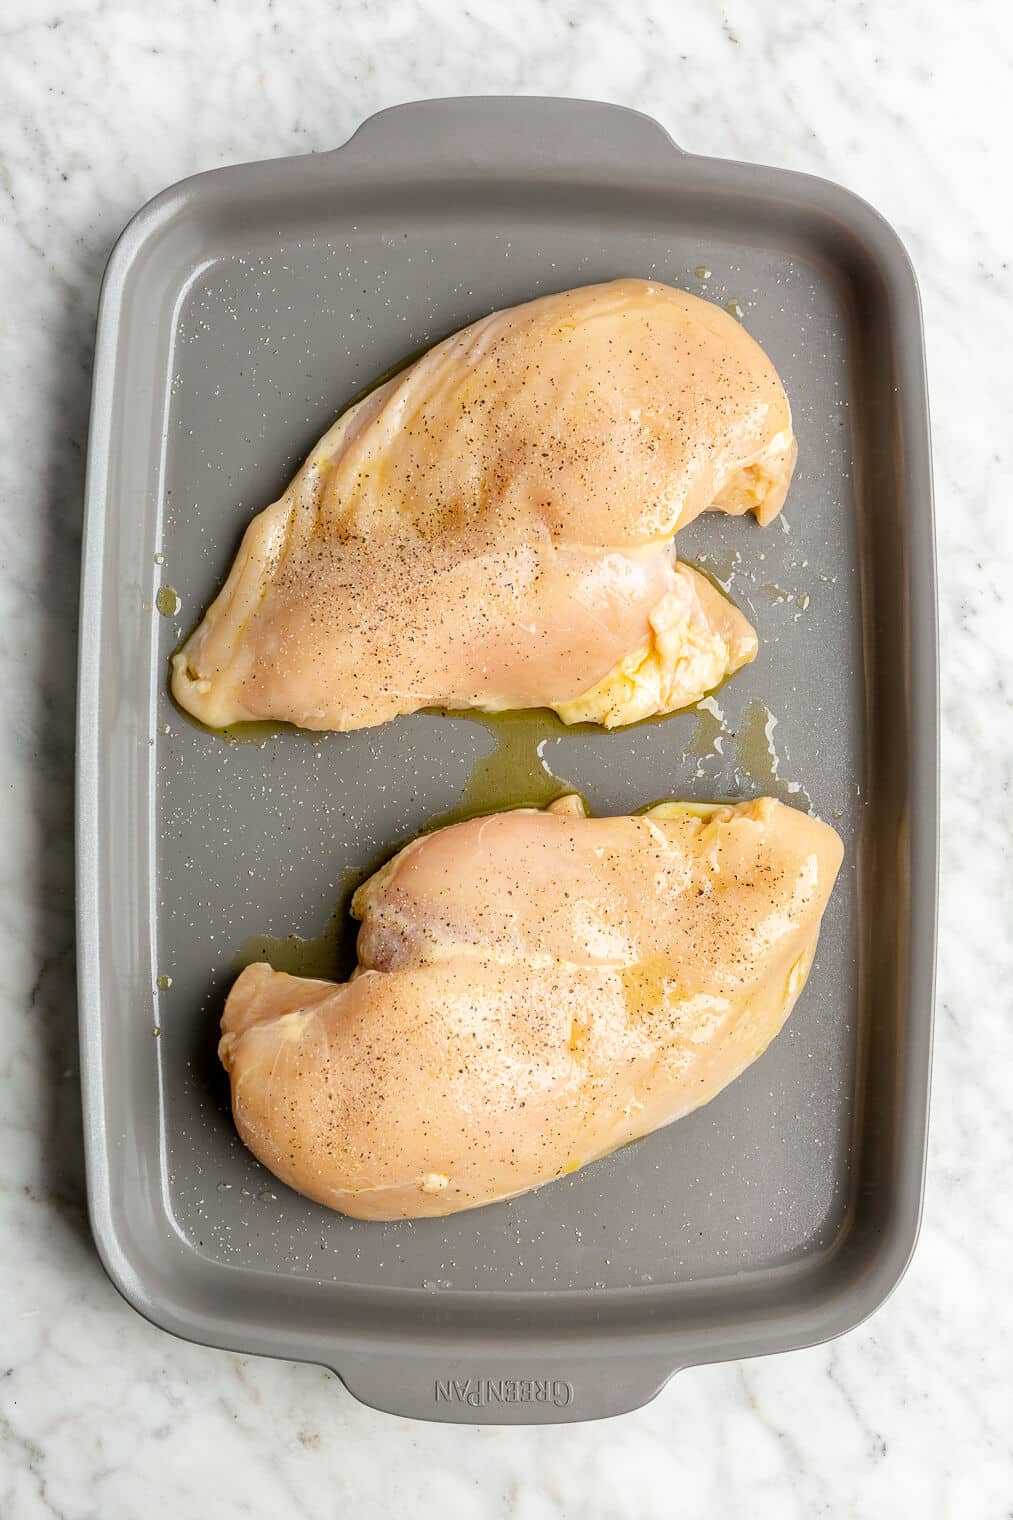 Two raw chicken breasts seasoned with salt, pepper, and olive oil on a sheet pan.